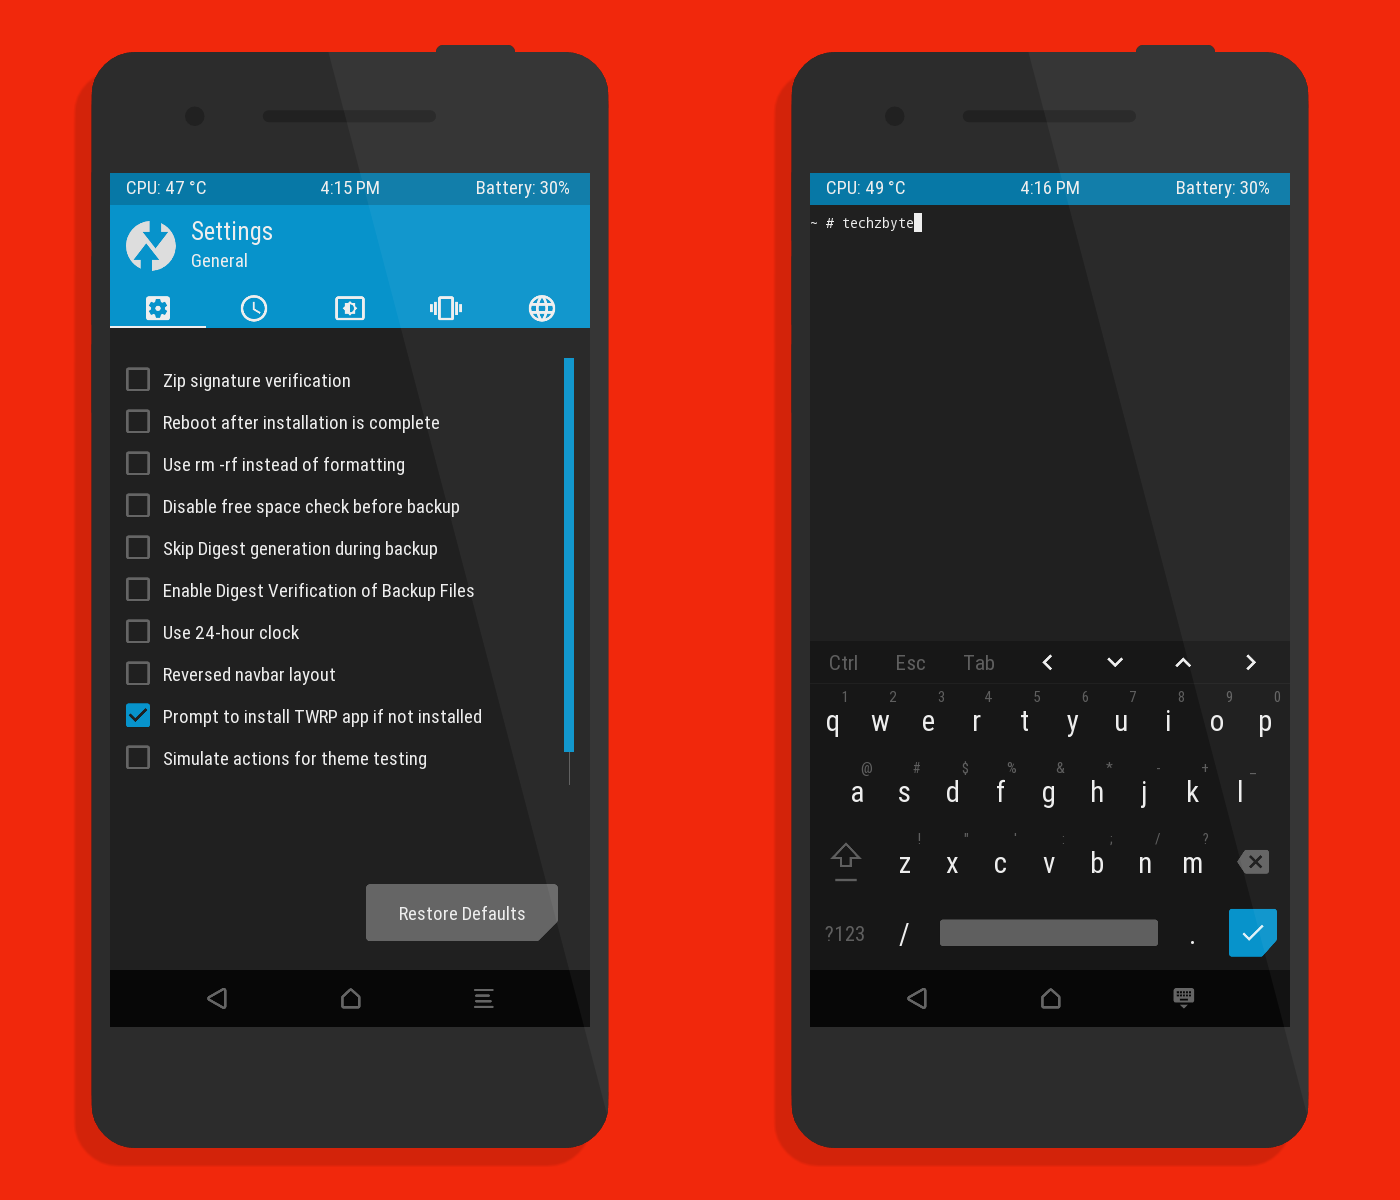 TWRP 3.2.1 for infinix hot 2